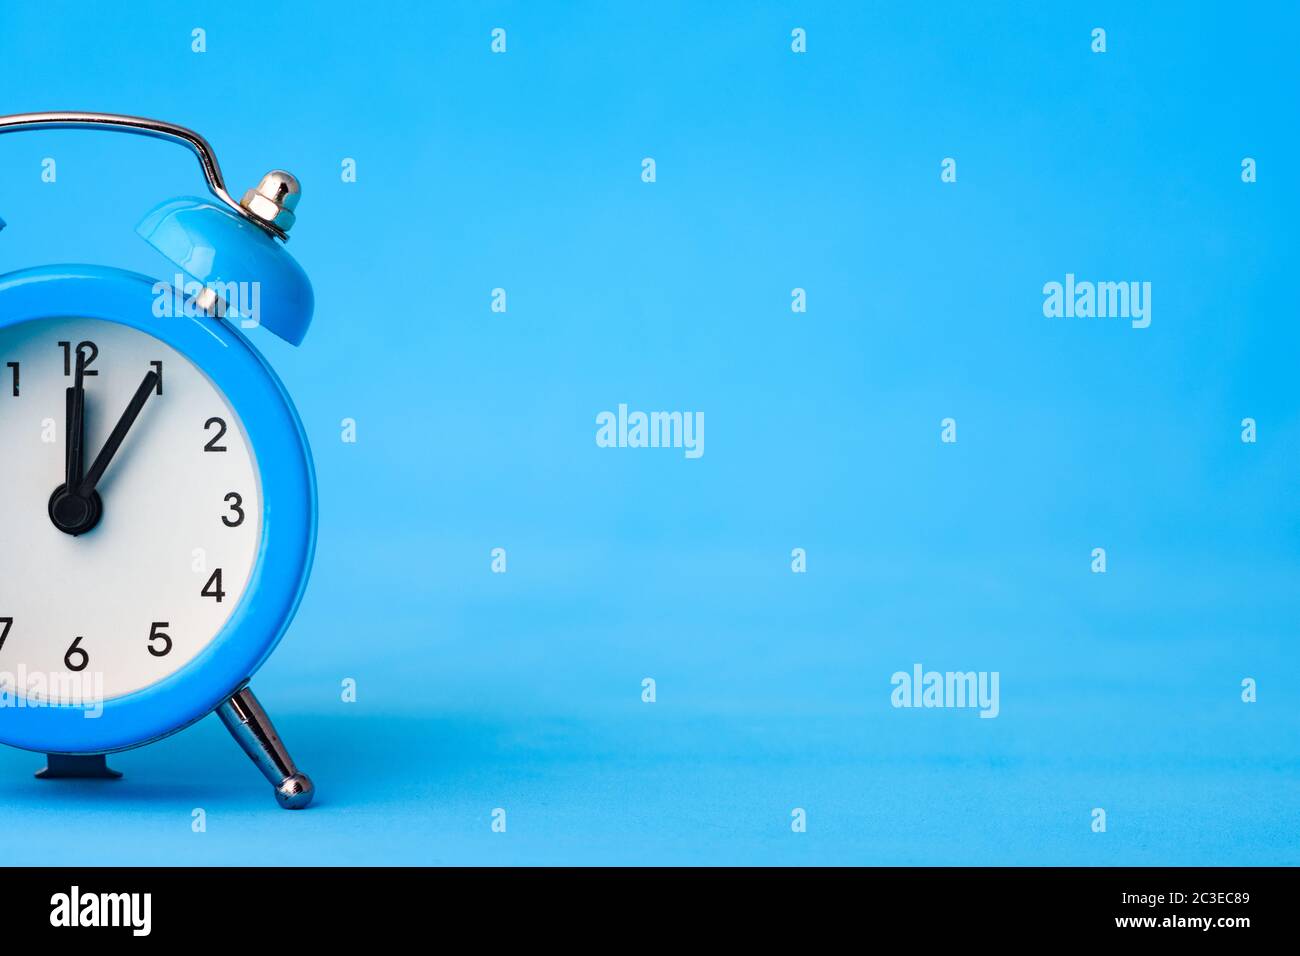 Part of the alarm clock on the left, on the right is an empty place, blue background Stock Photo